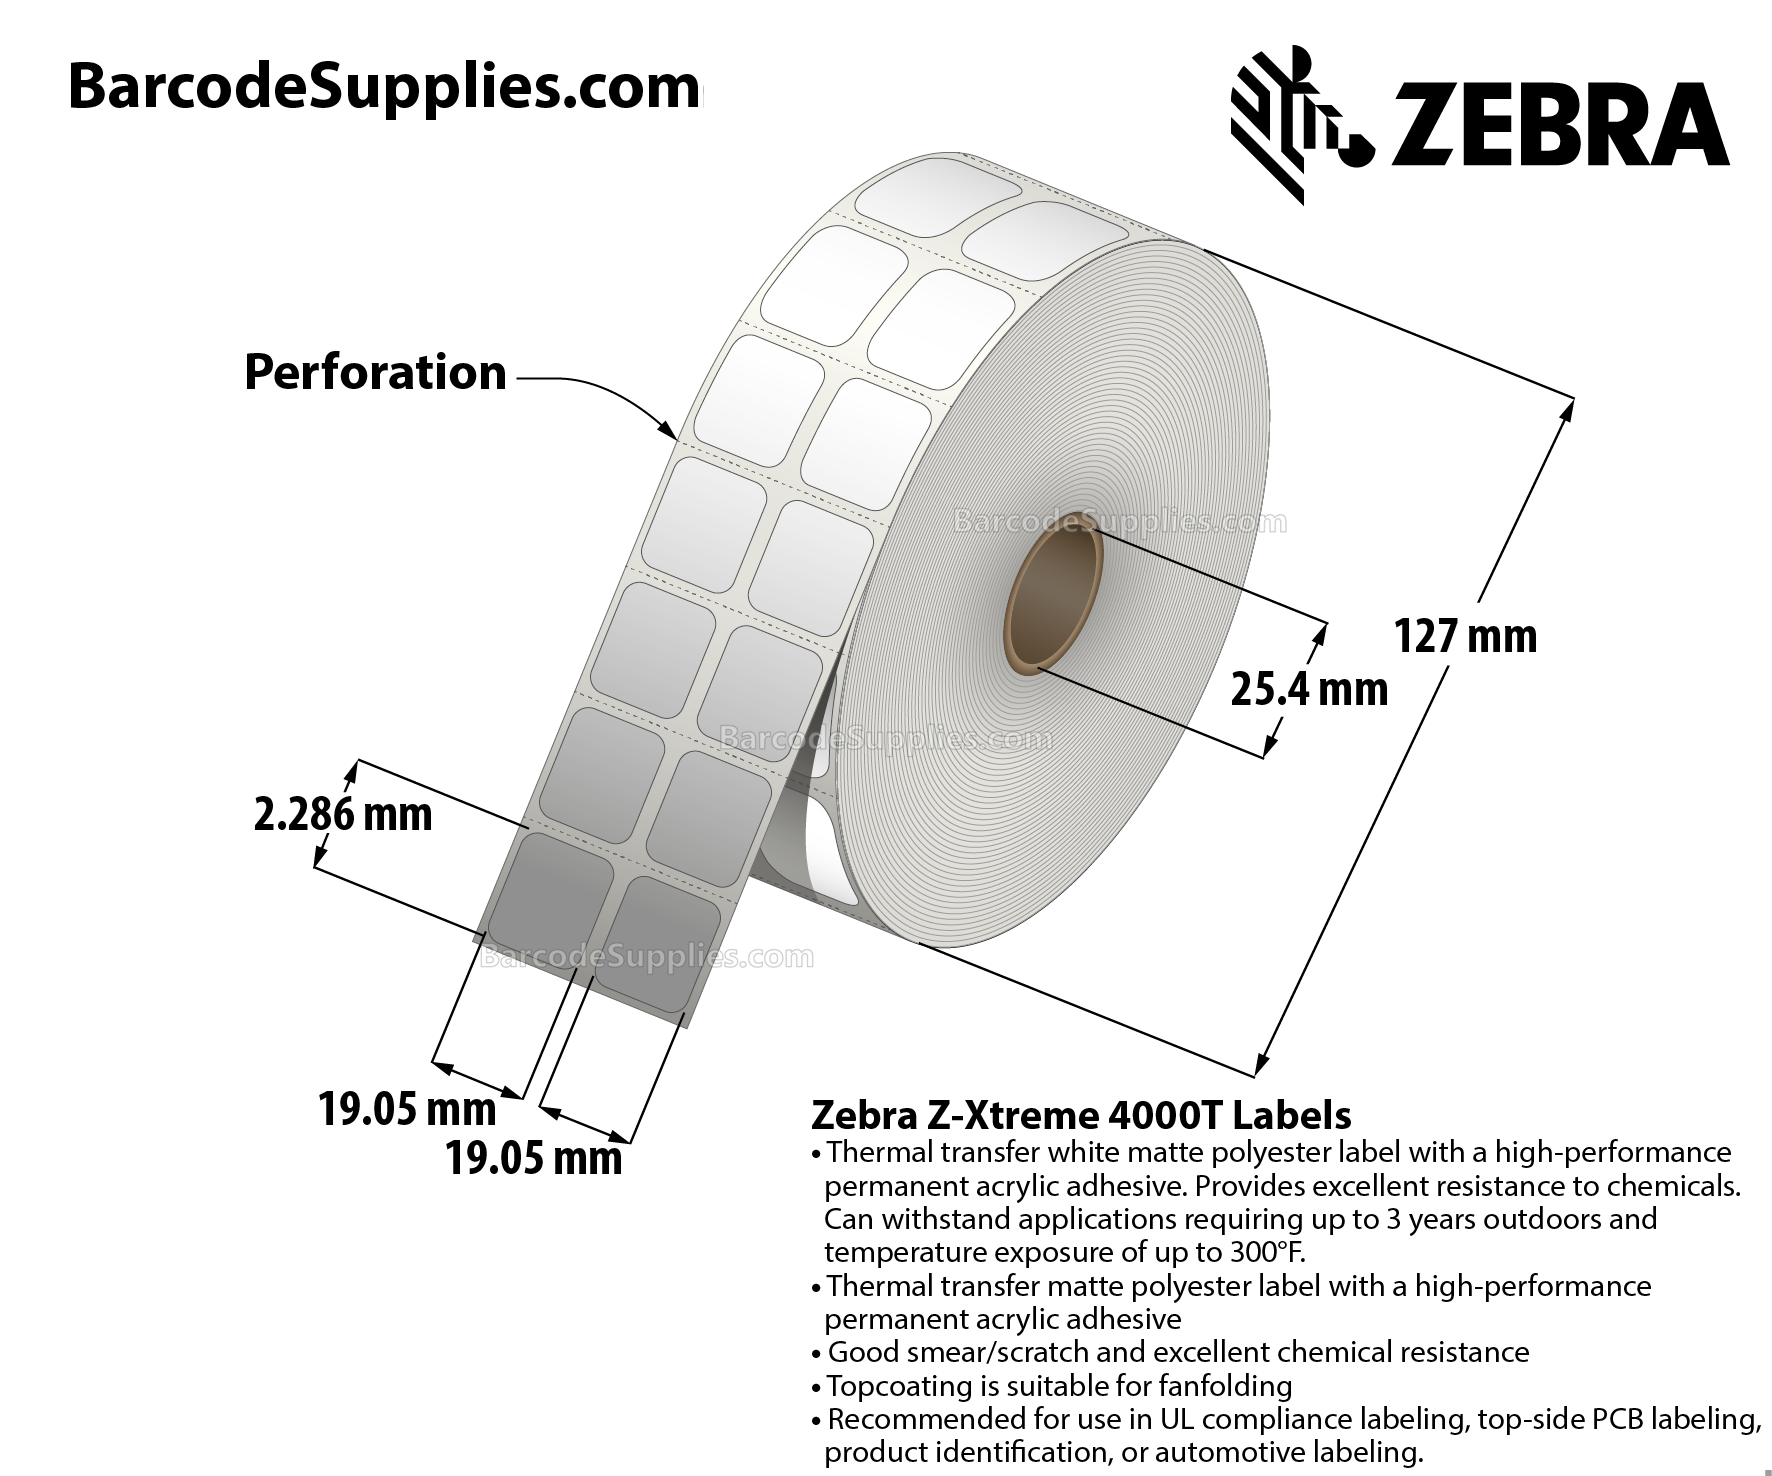 0.75 x 0.9 Thermal Transfer White Z-Xtreme 4000T White (2-Across) Labels With Permanent Adhesive - Black mark sensing - Perforated - 1500 Labels Per Roll - Carton Of 1 Rolls - 1500 Labels Total - MPN: 10023236